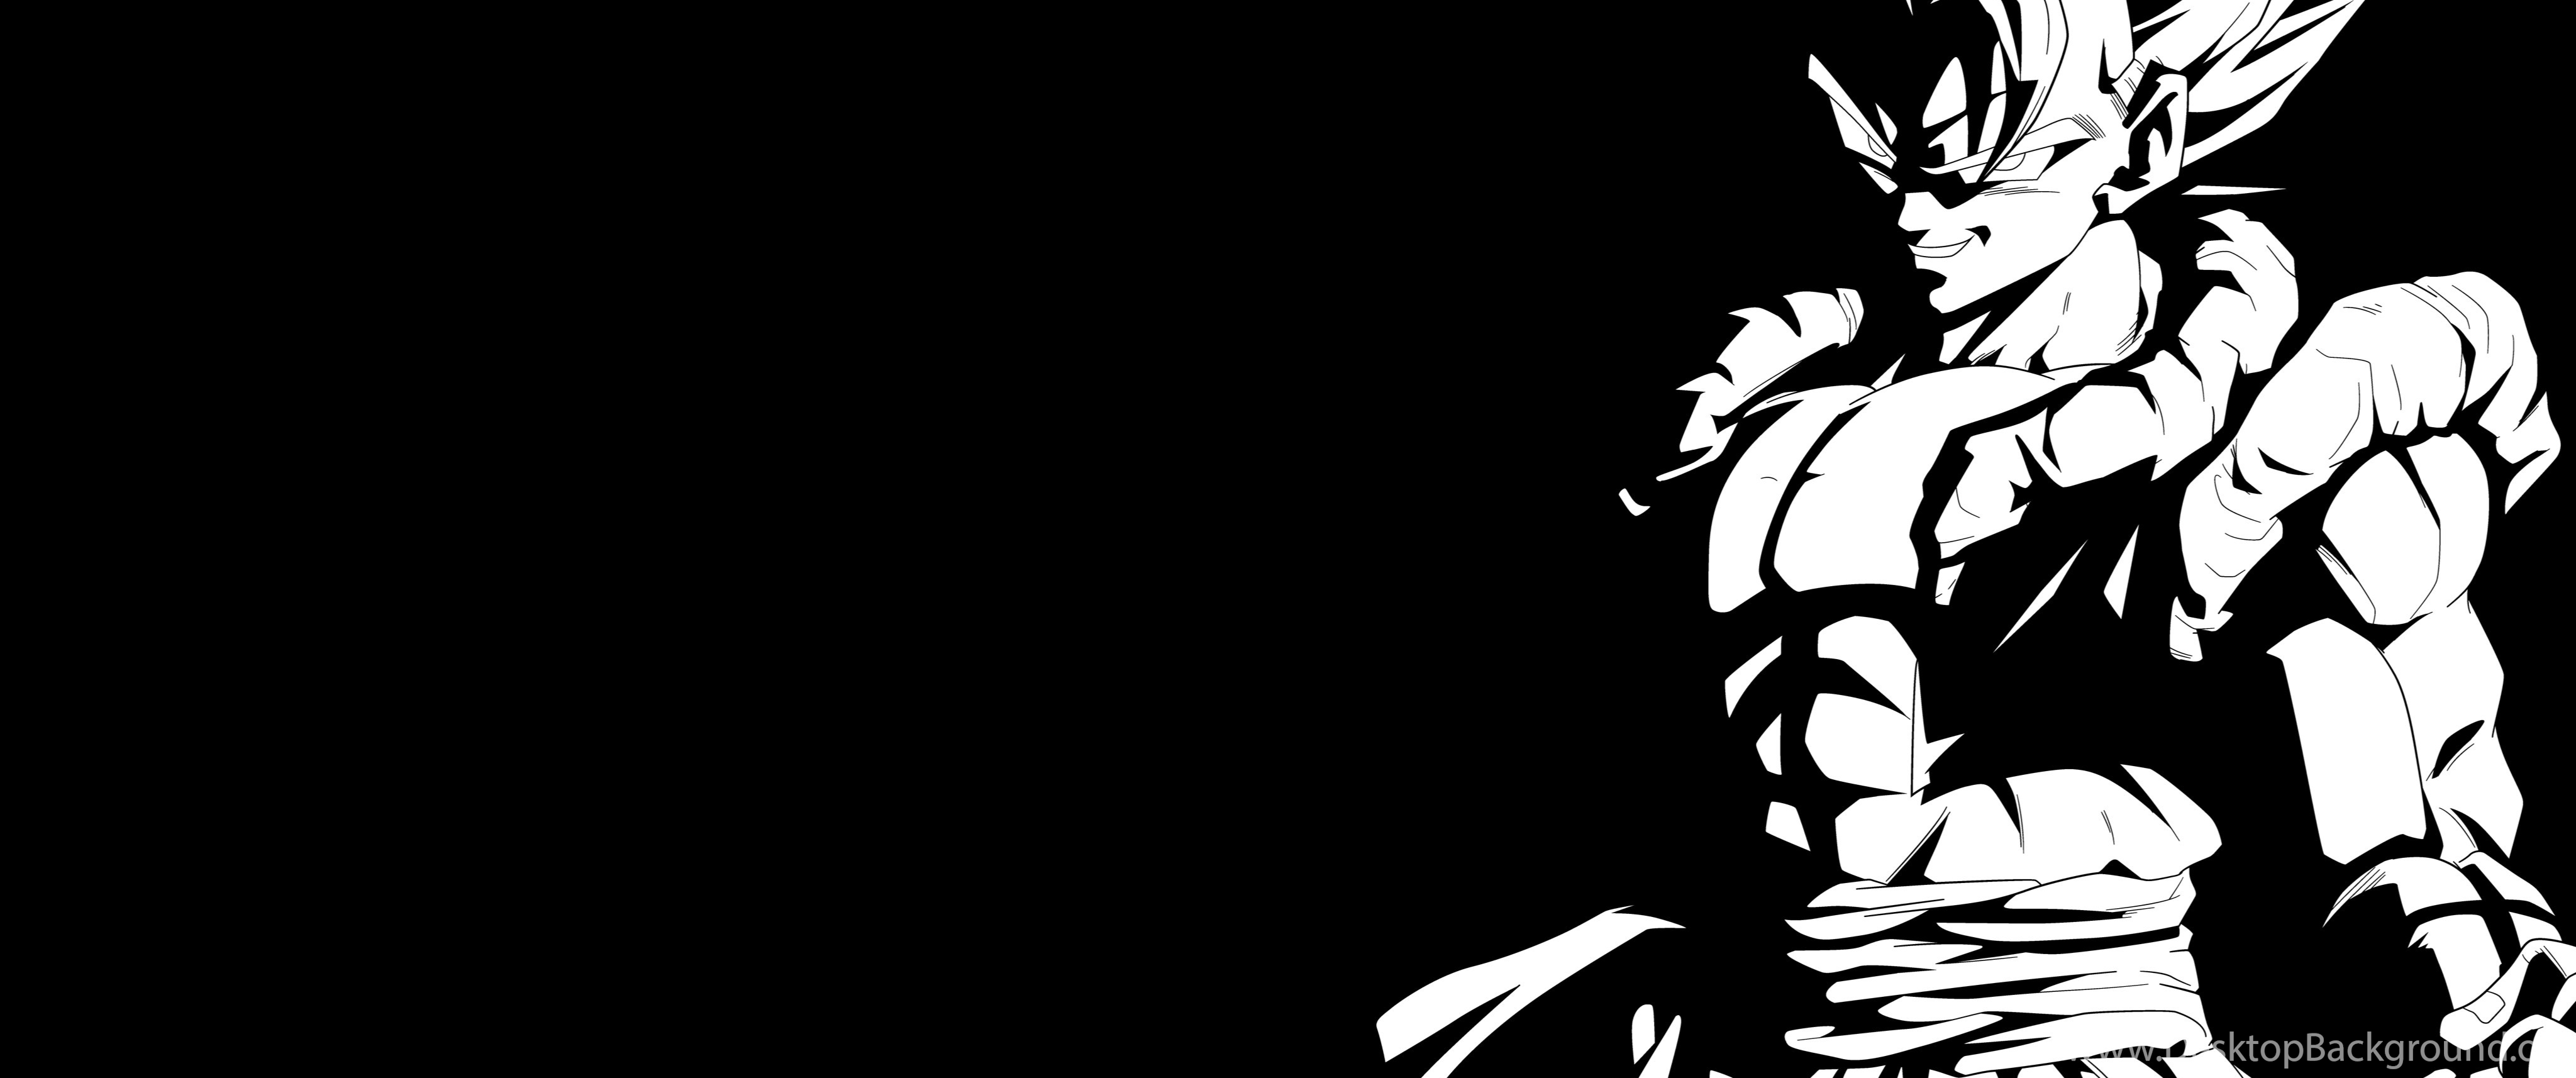 Download Super Gogeta Black And White 4K Wallpapers By RayzorBlade189 On .....